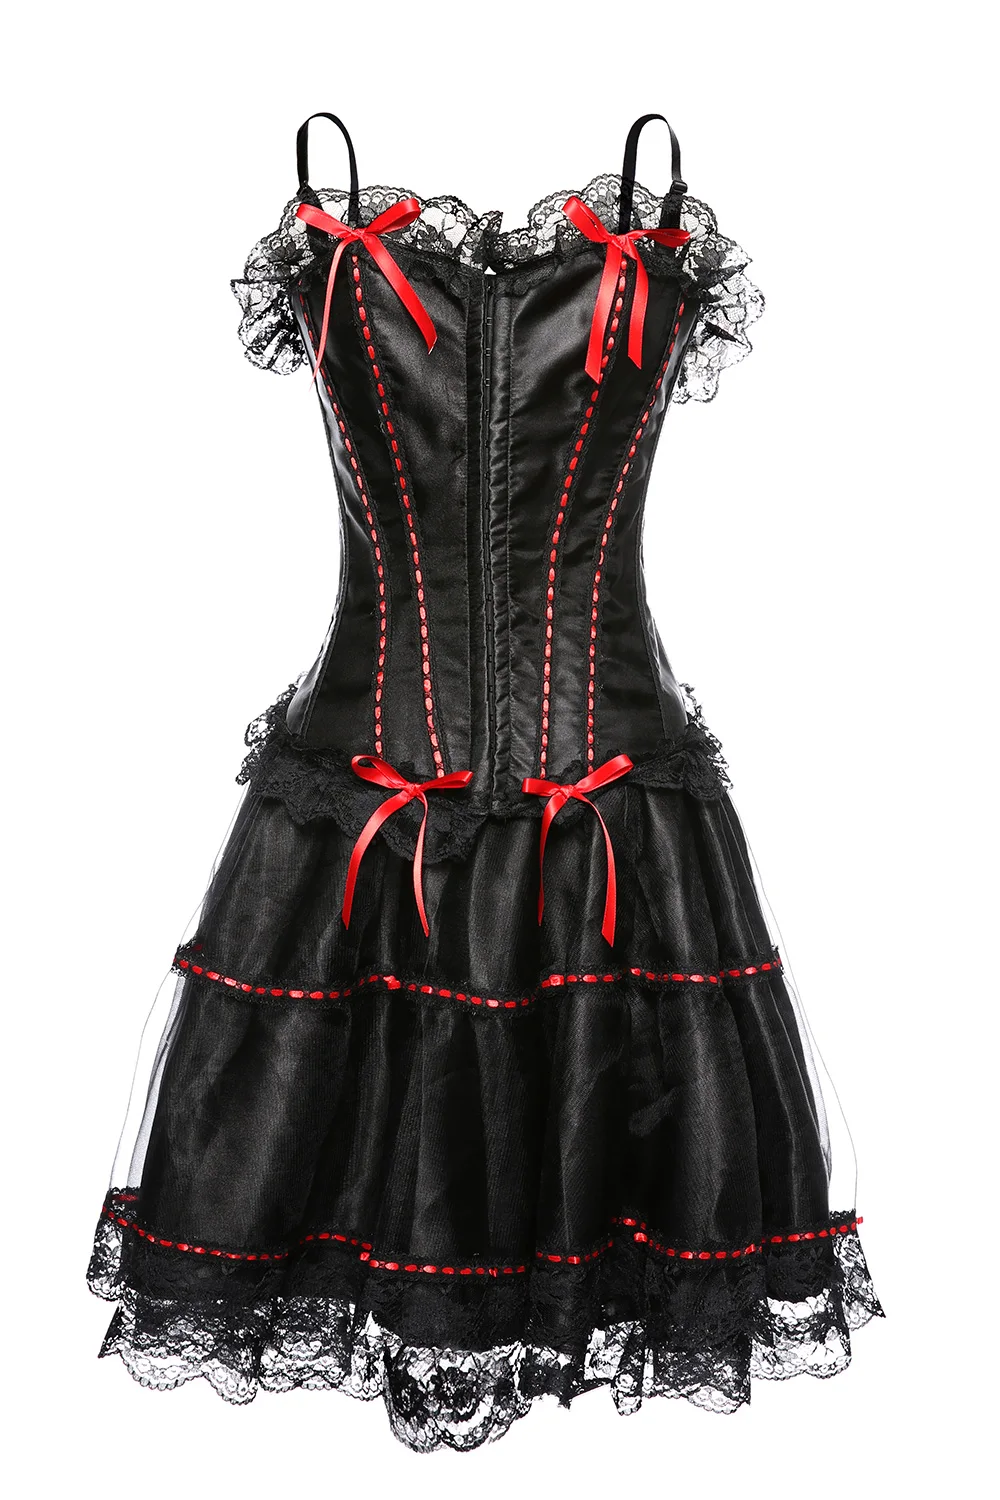 

Sexy Burlesques Strap Corset Dress Basques Skirt Lingerie 067+066 Plus Size S-6XL Corset with skirts